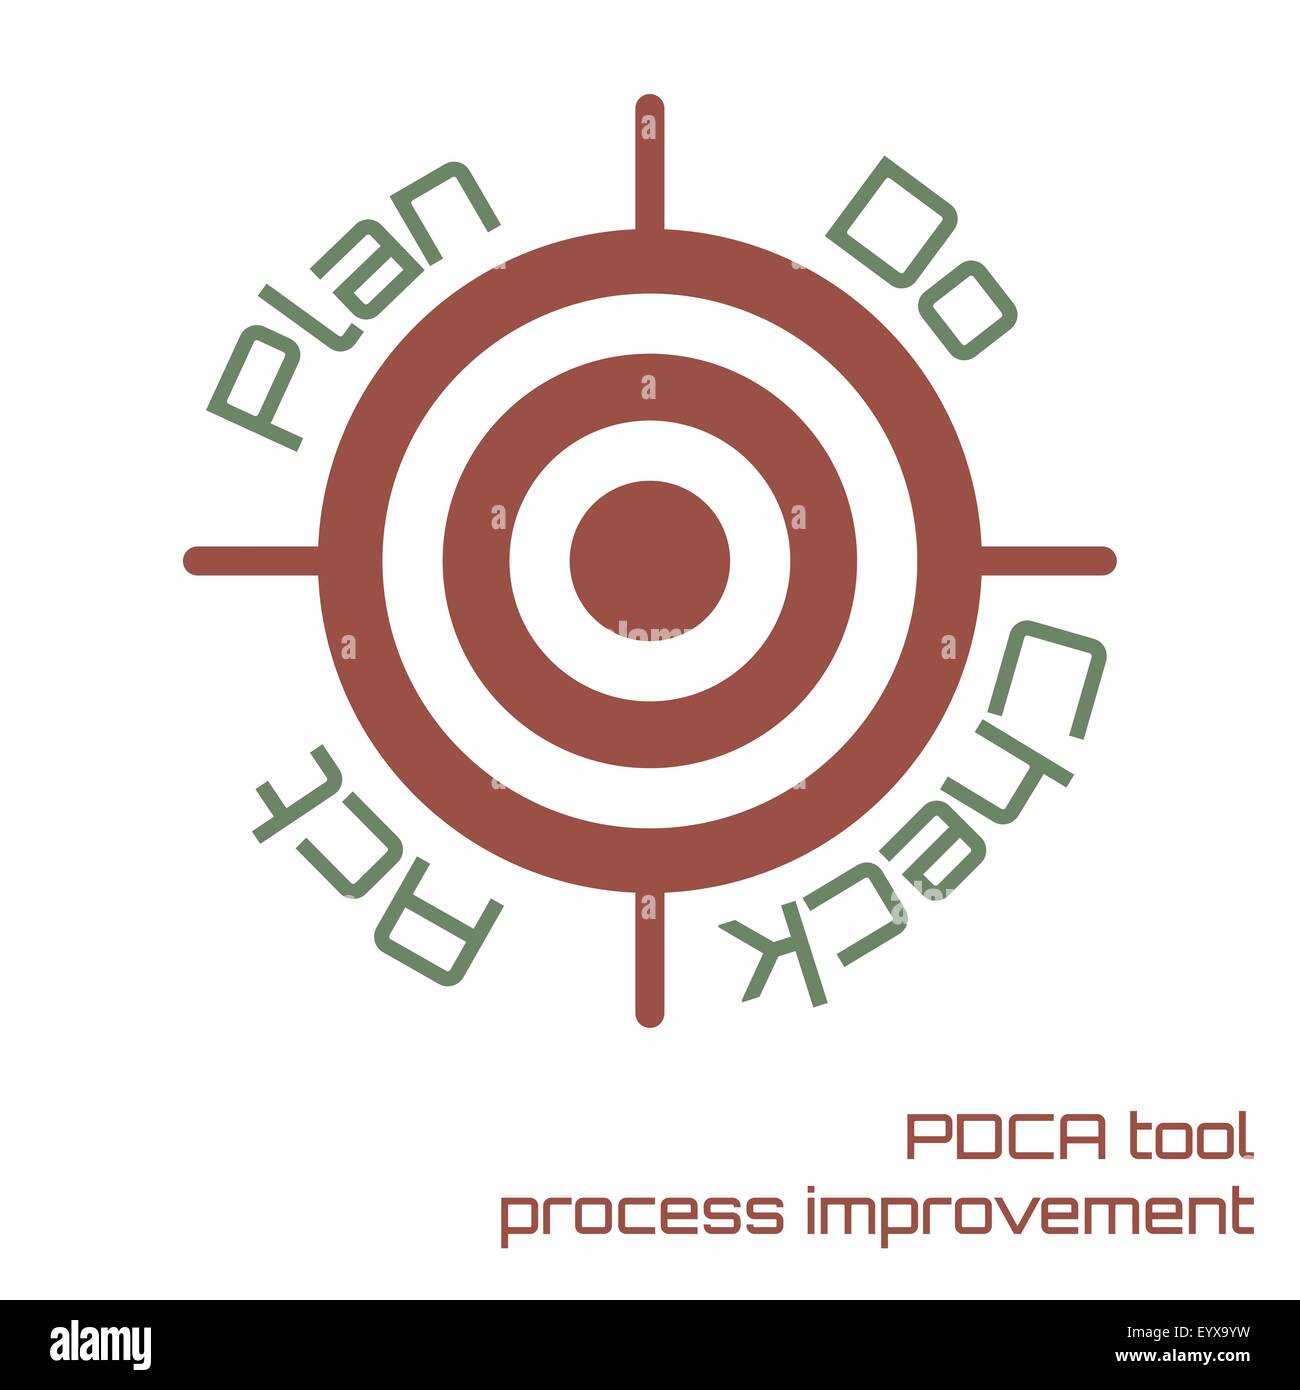 Process improvement PDCA tool to achieve the business target vector illustration. Stock Vector